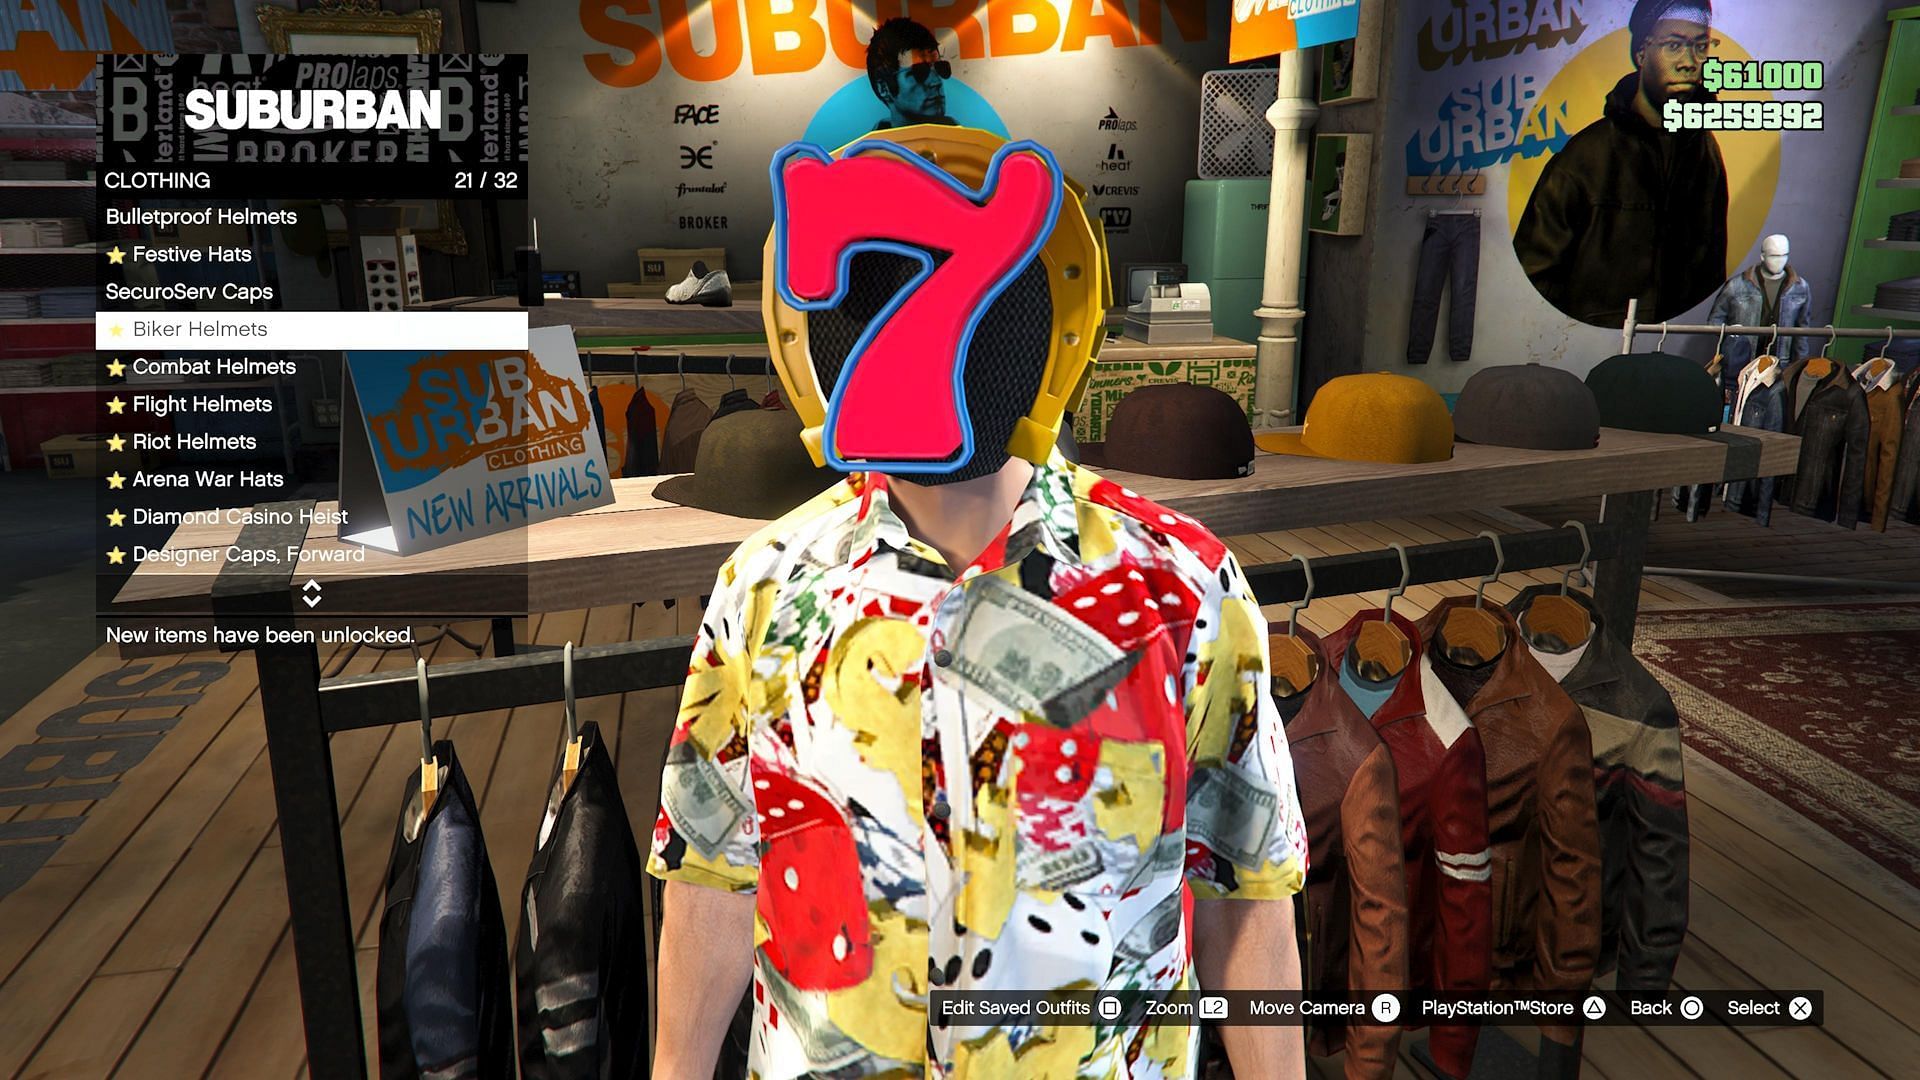 A few items that may interest you are located here (Image via Rockstar Games)